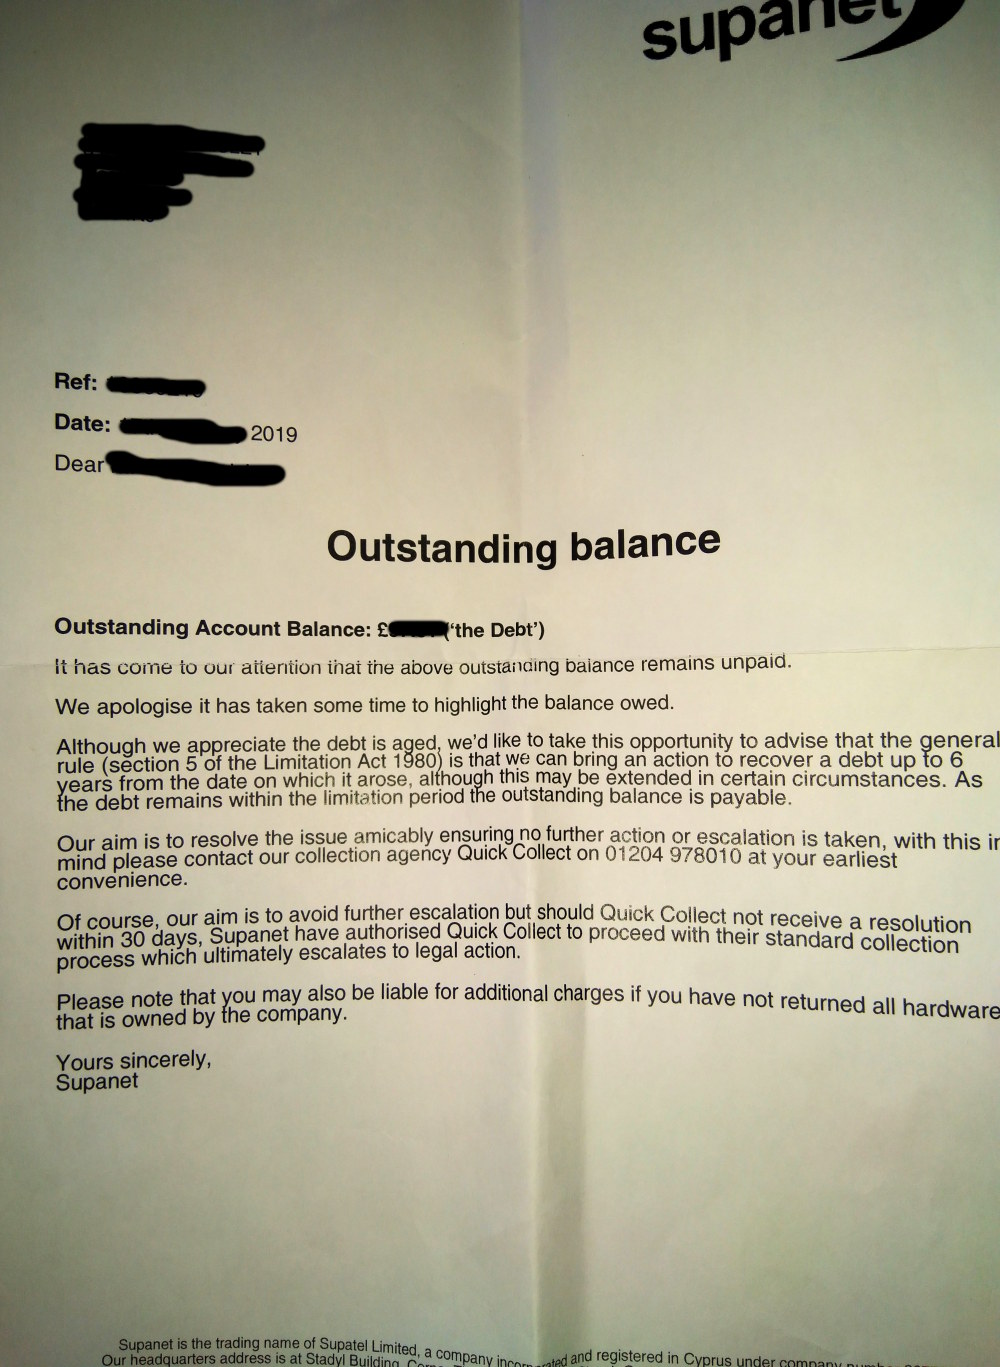 supanet quick collect unpaid bill claim letter uk isp